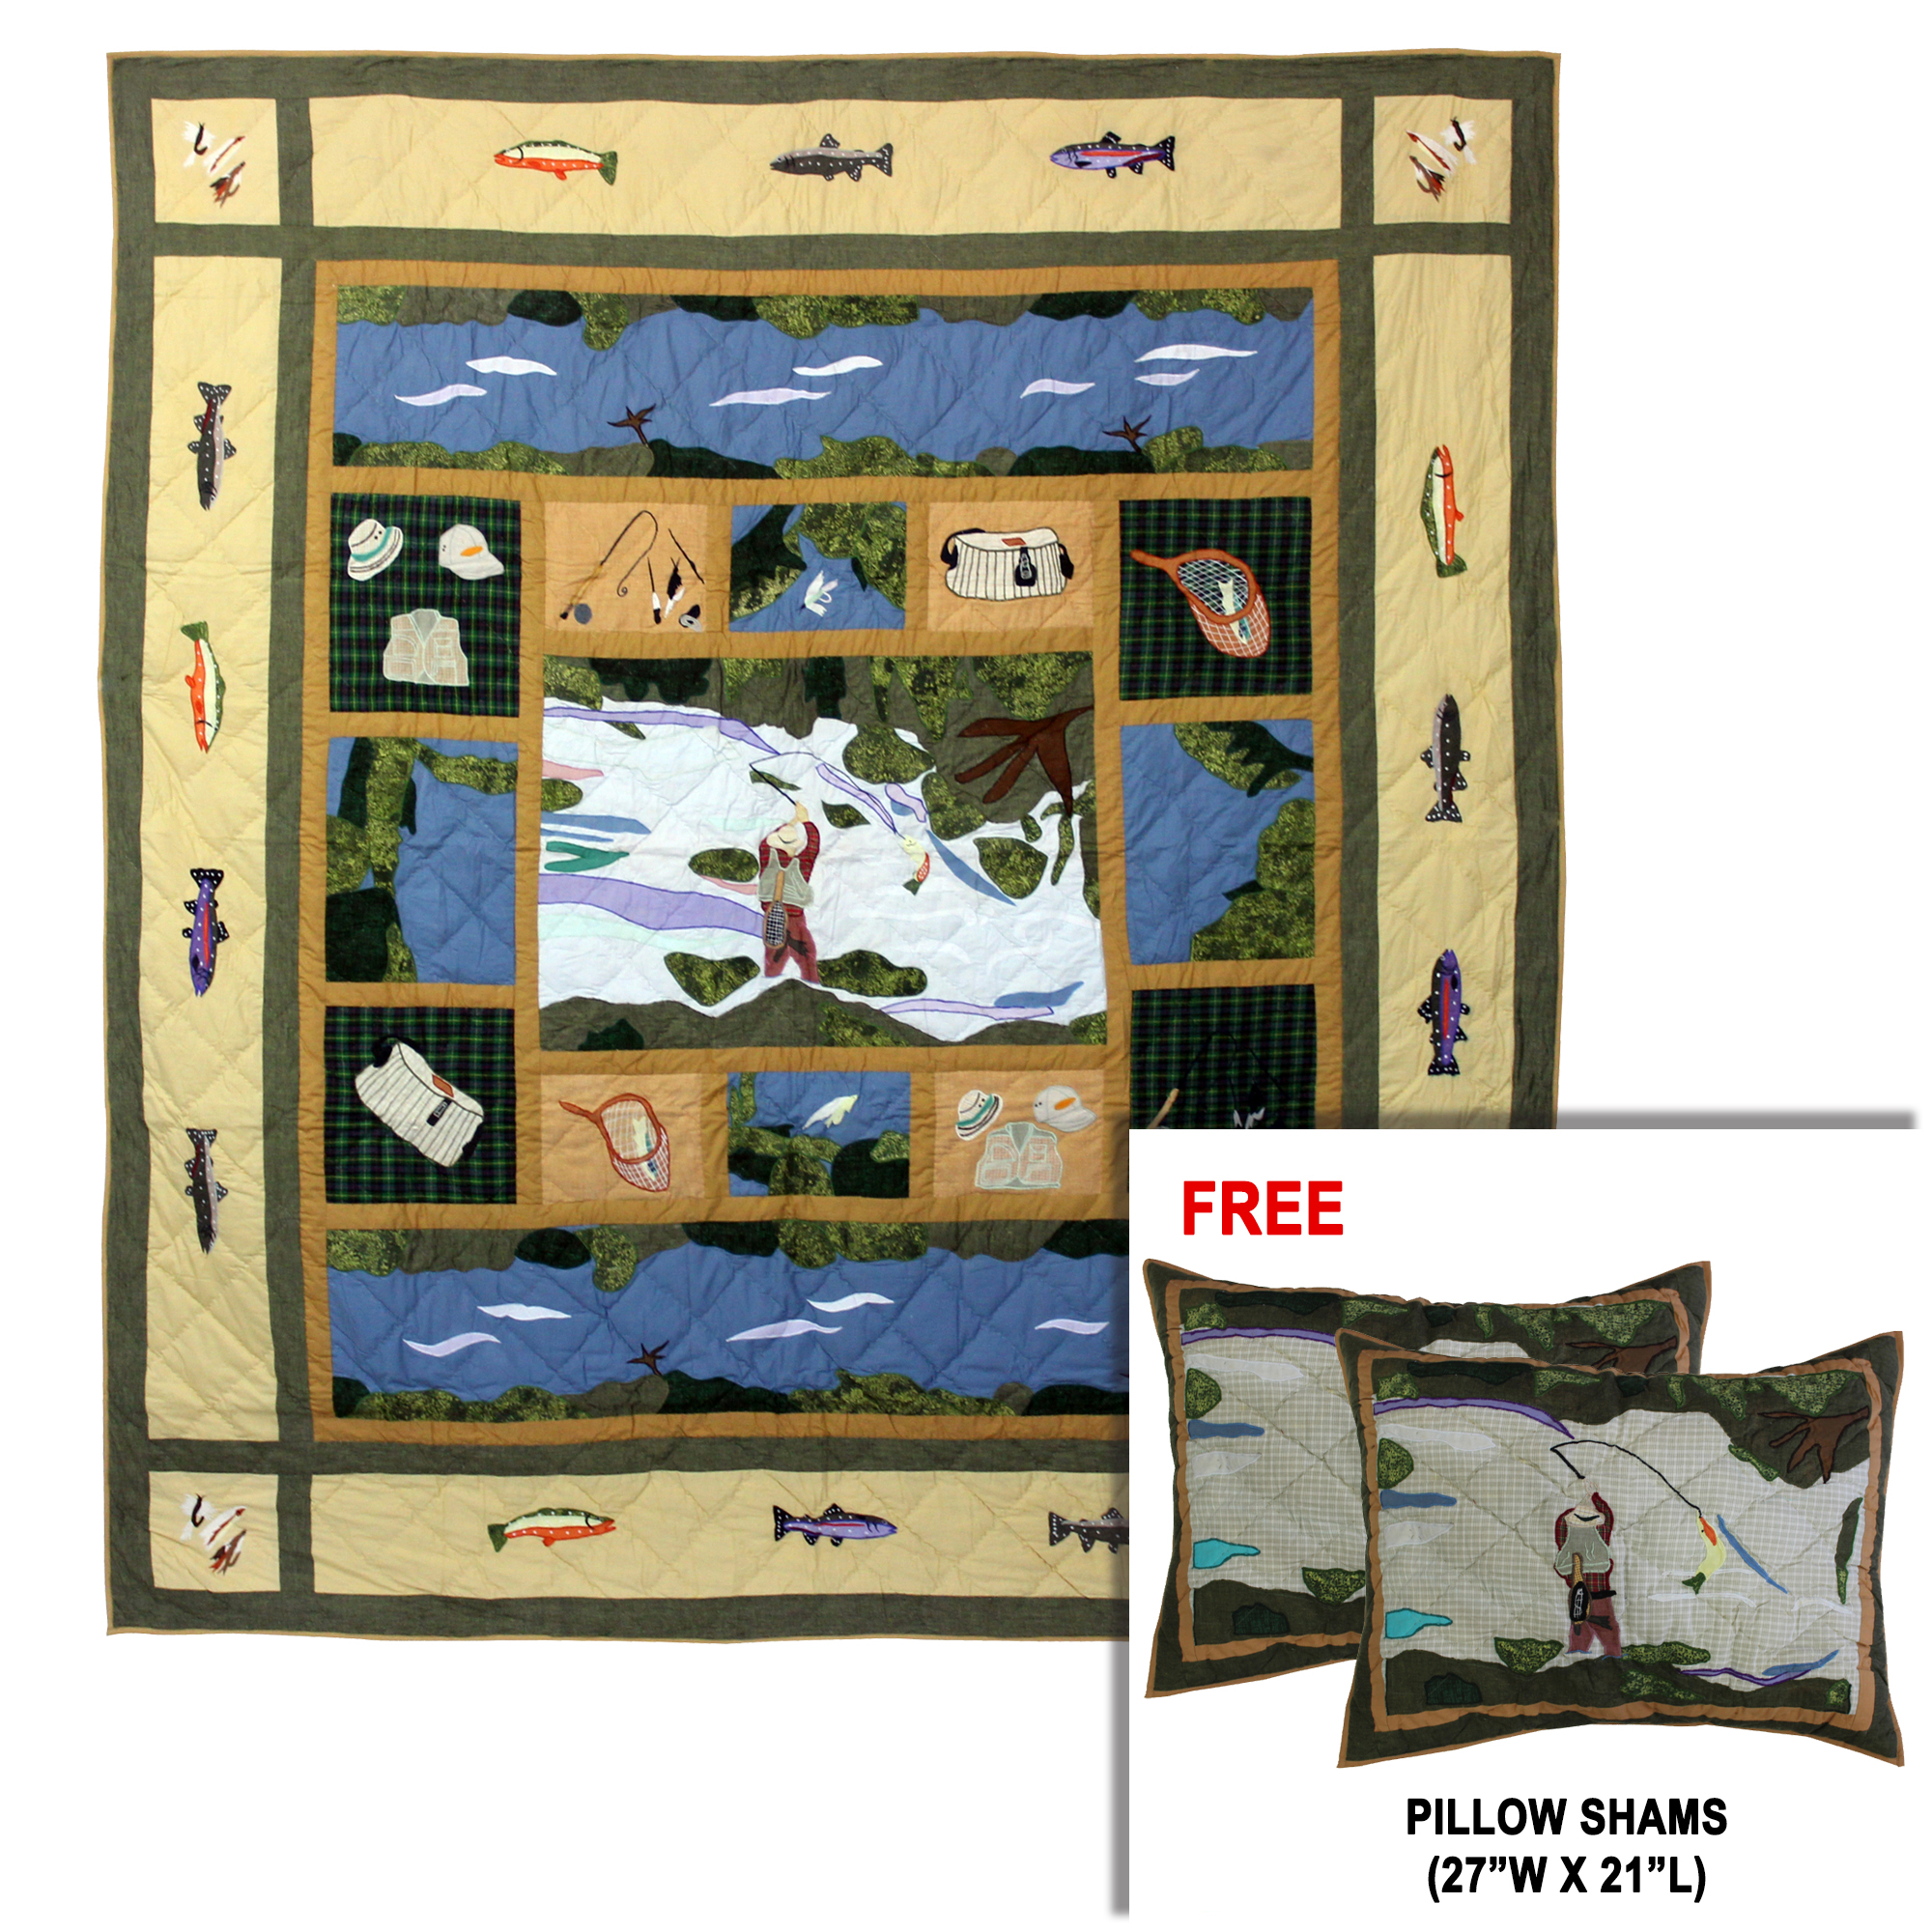 Fly Fishing King Quilt 105"W x 95"L | Buy a King Quilt and get a Matching Pillow Shams (27"W x 21"L) FREE